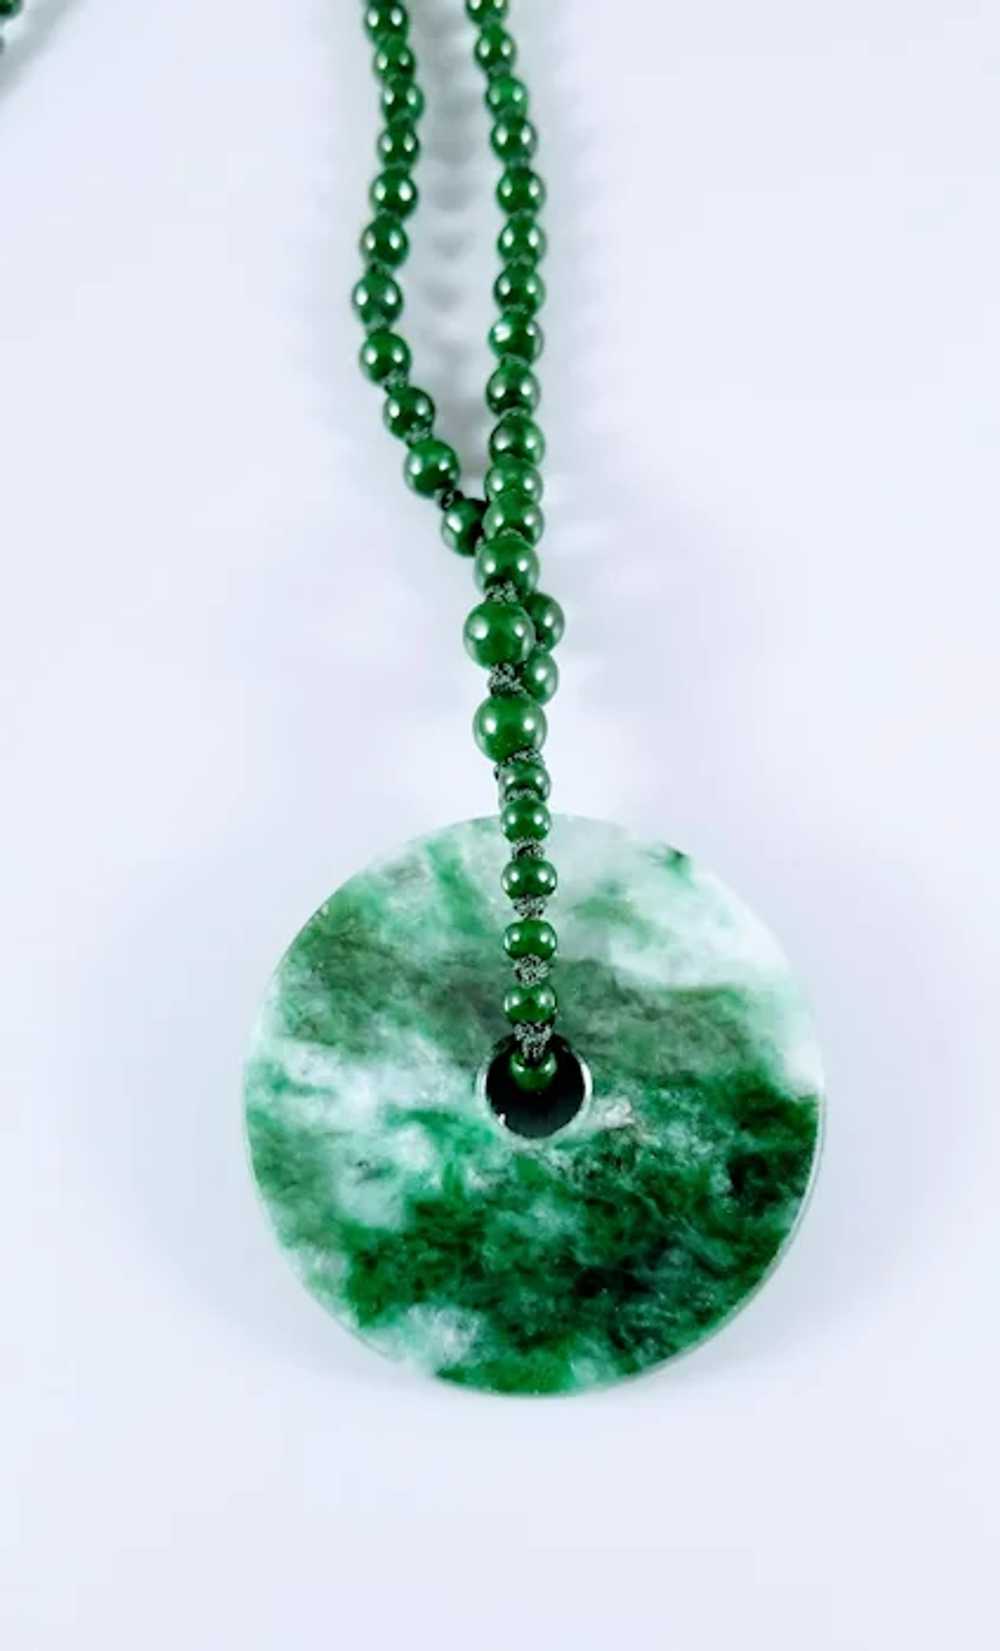 14K Jadeite Pendant and Beads Necklace - image 2